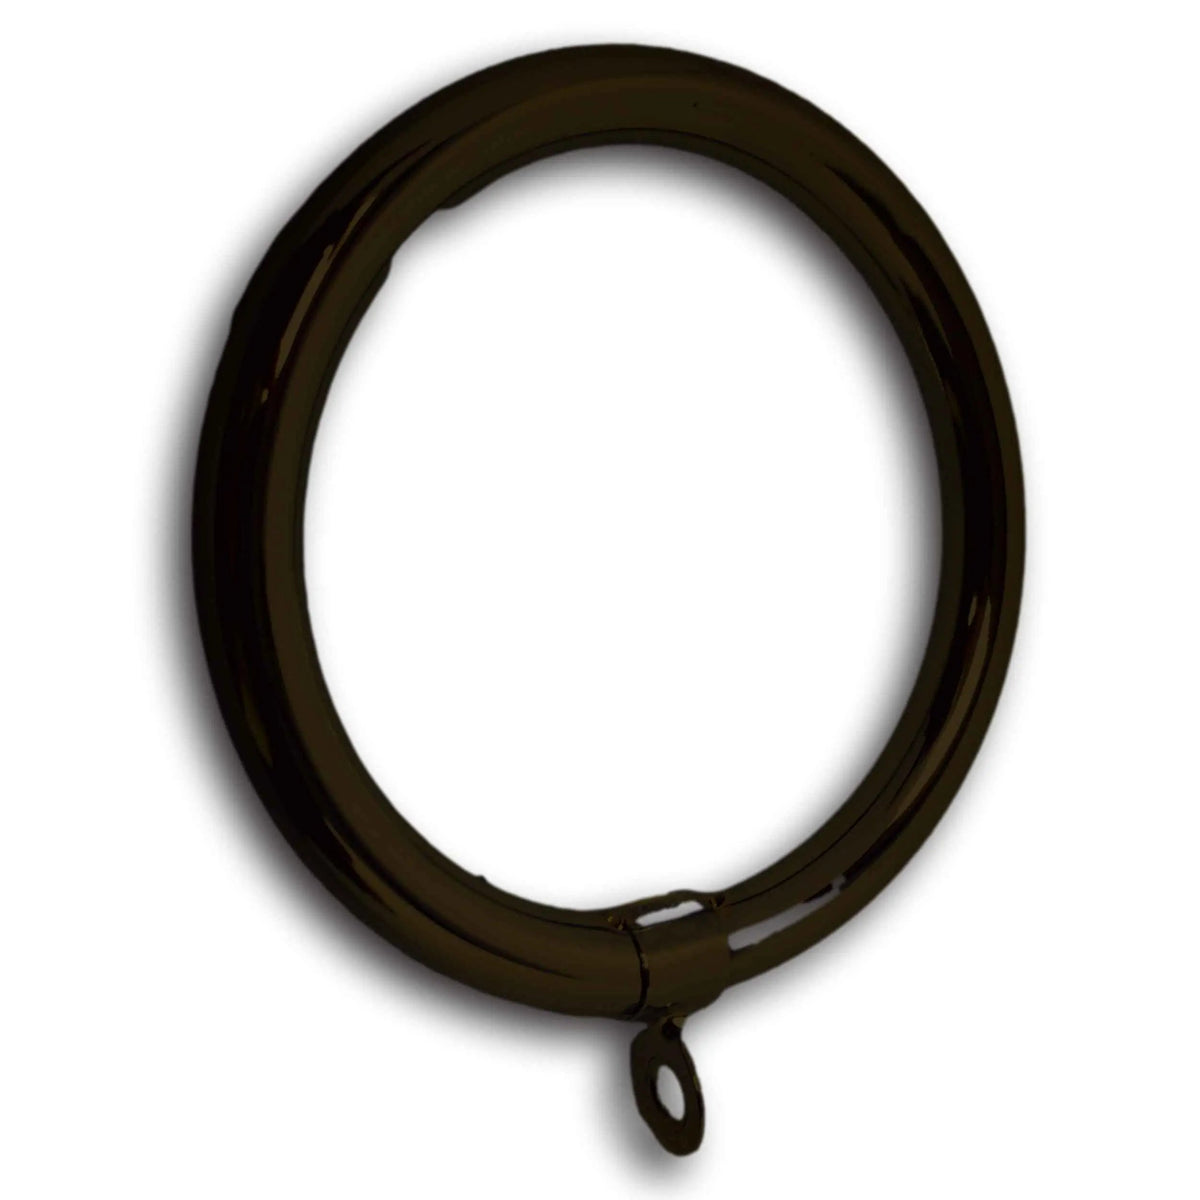 Curtain Ring for 1-1/2" Tubing Components for 1-1/2" Od Tubing, Drapery Hardware OilRubbedBronzeFinish-PleaseCall Trade Diversified